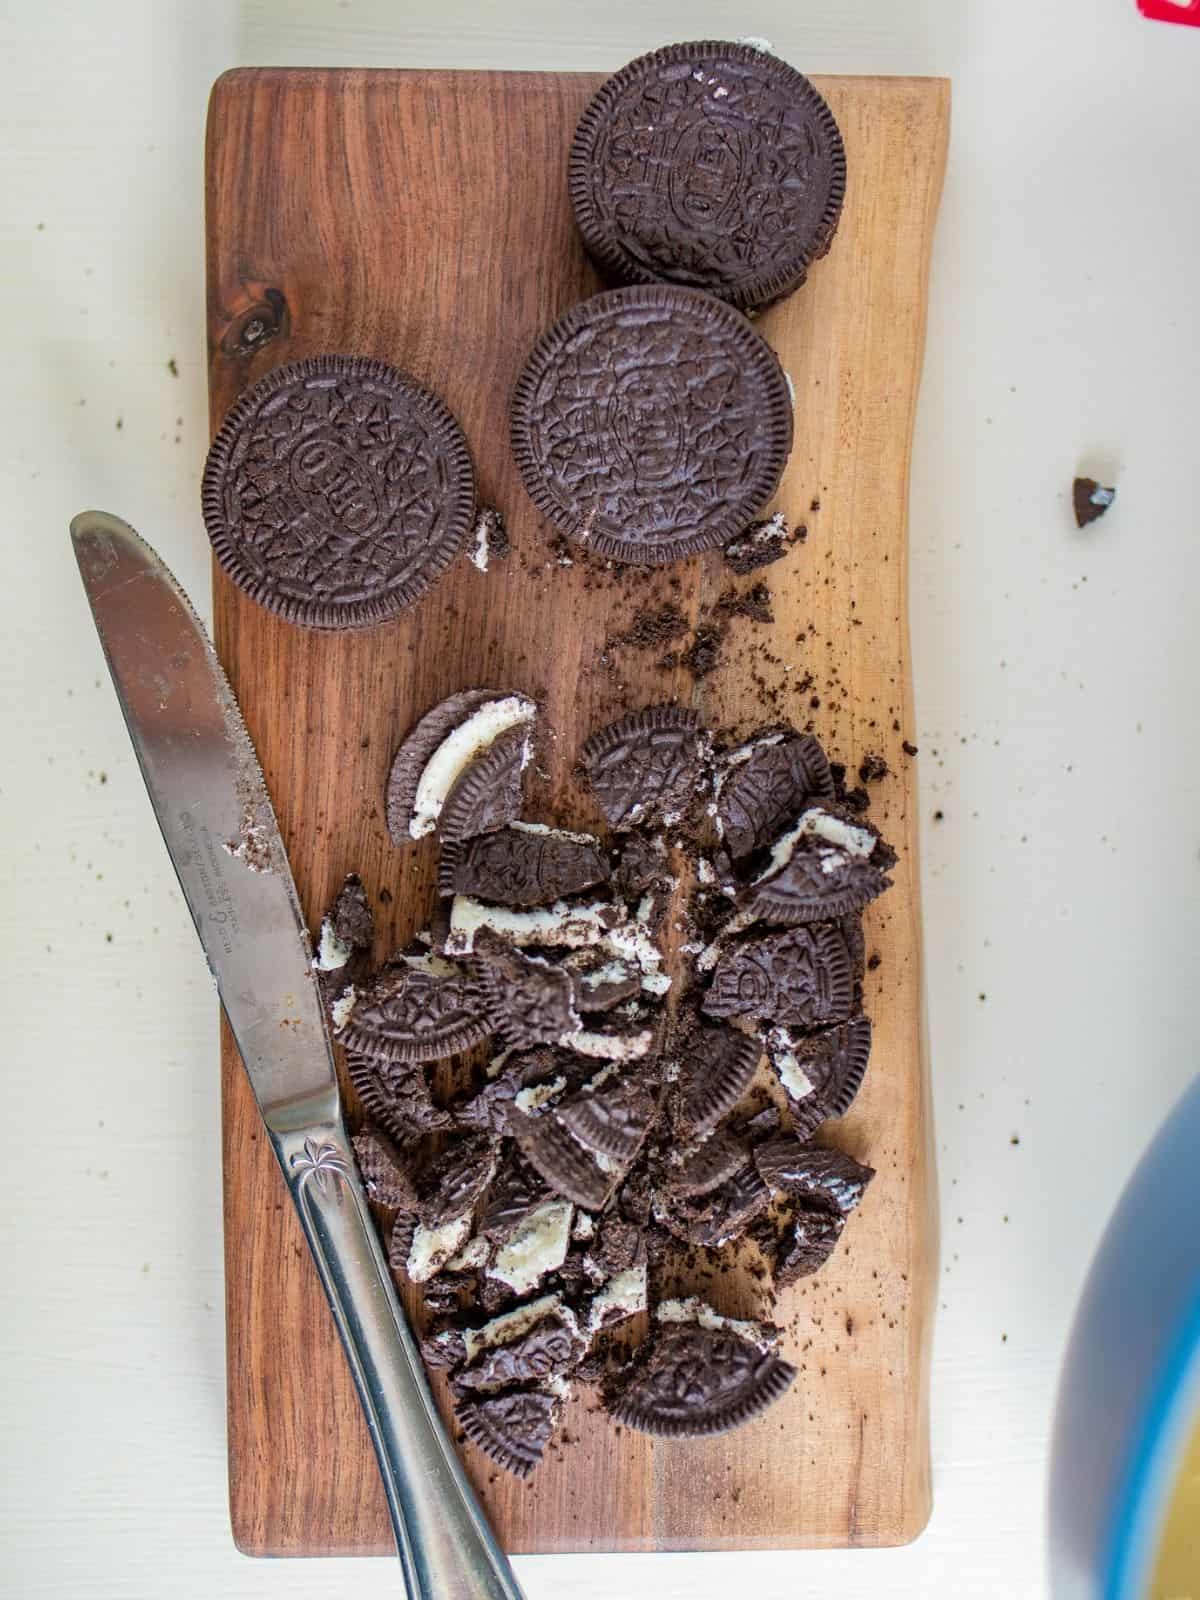 chopped and whole Oreo cookies on cutting board.